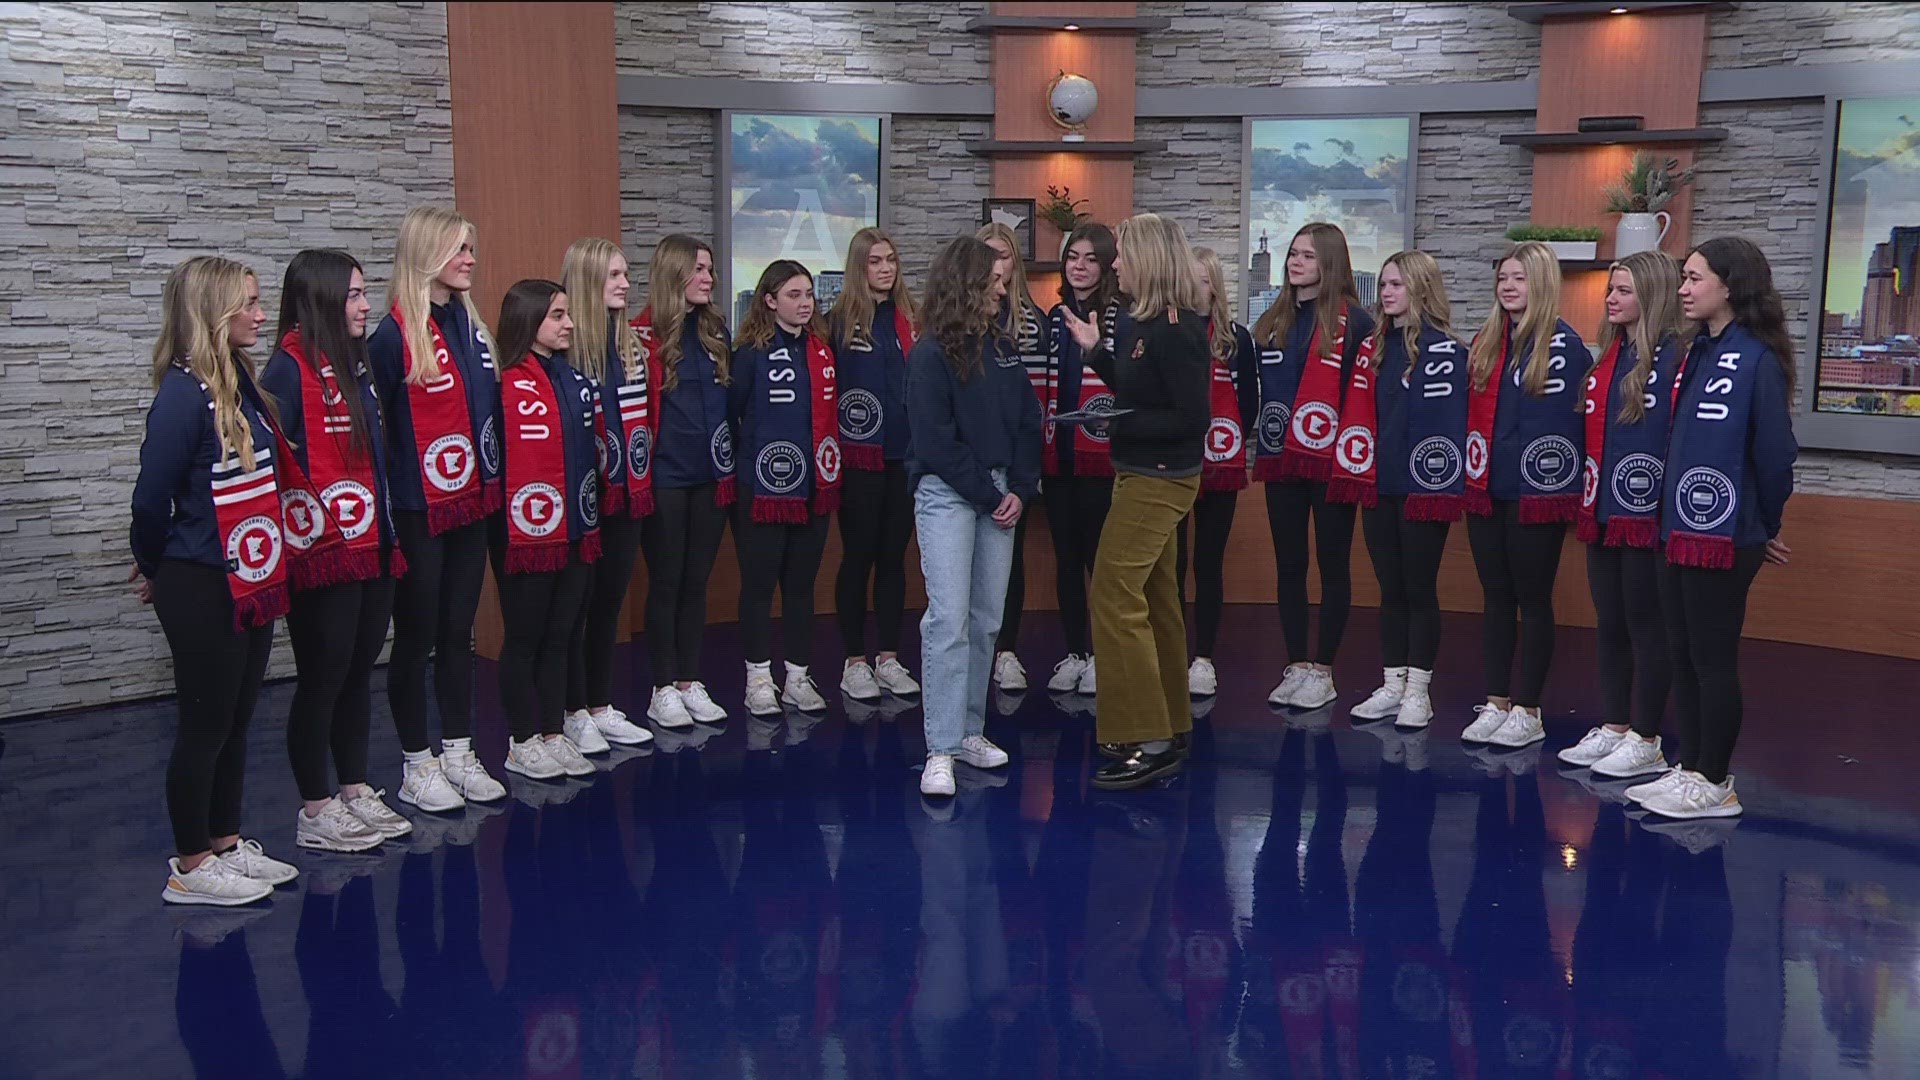 Minnesota is home to one of the nine top junior synchronized skating teams in the country: the Northernettes.